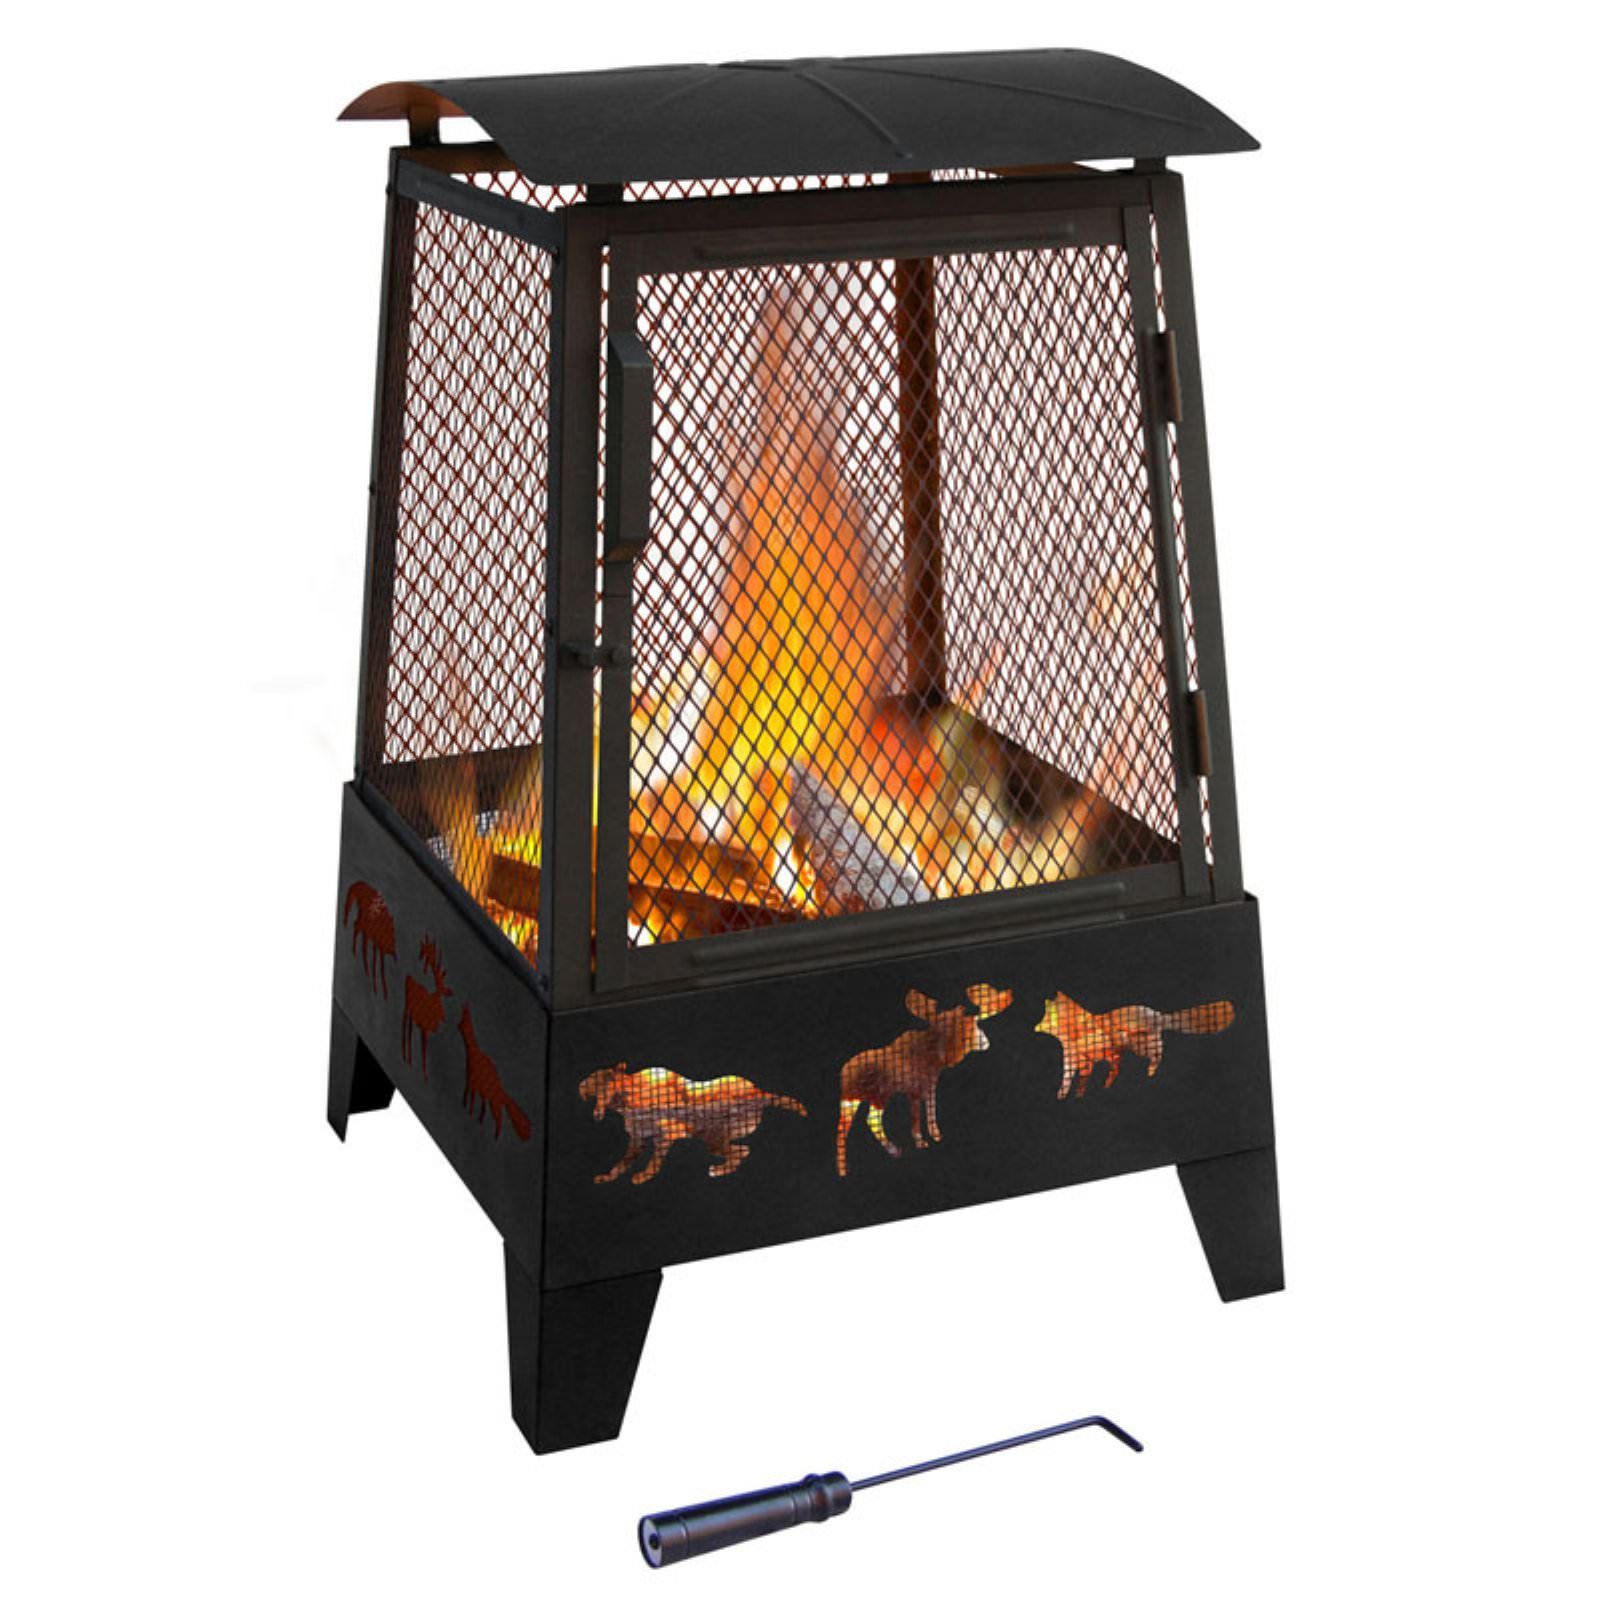 Amazon Fireplace Luxury Pin by Global News Wire On Best Prices the Web